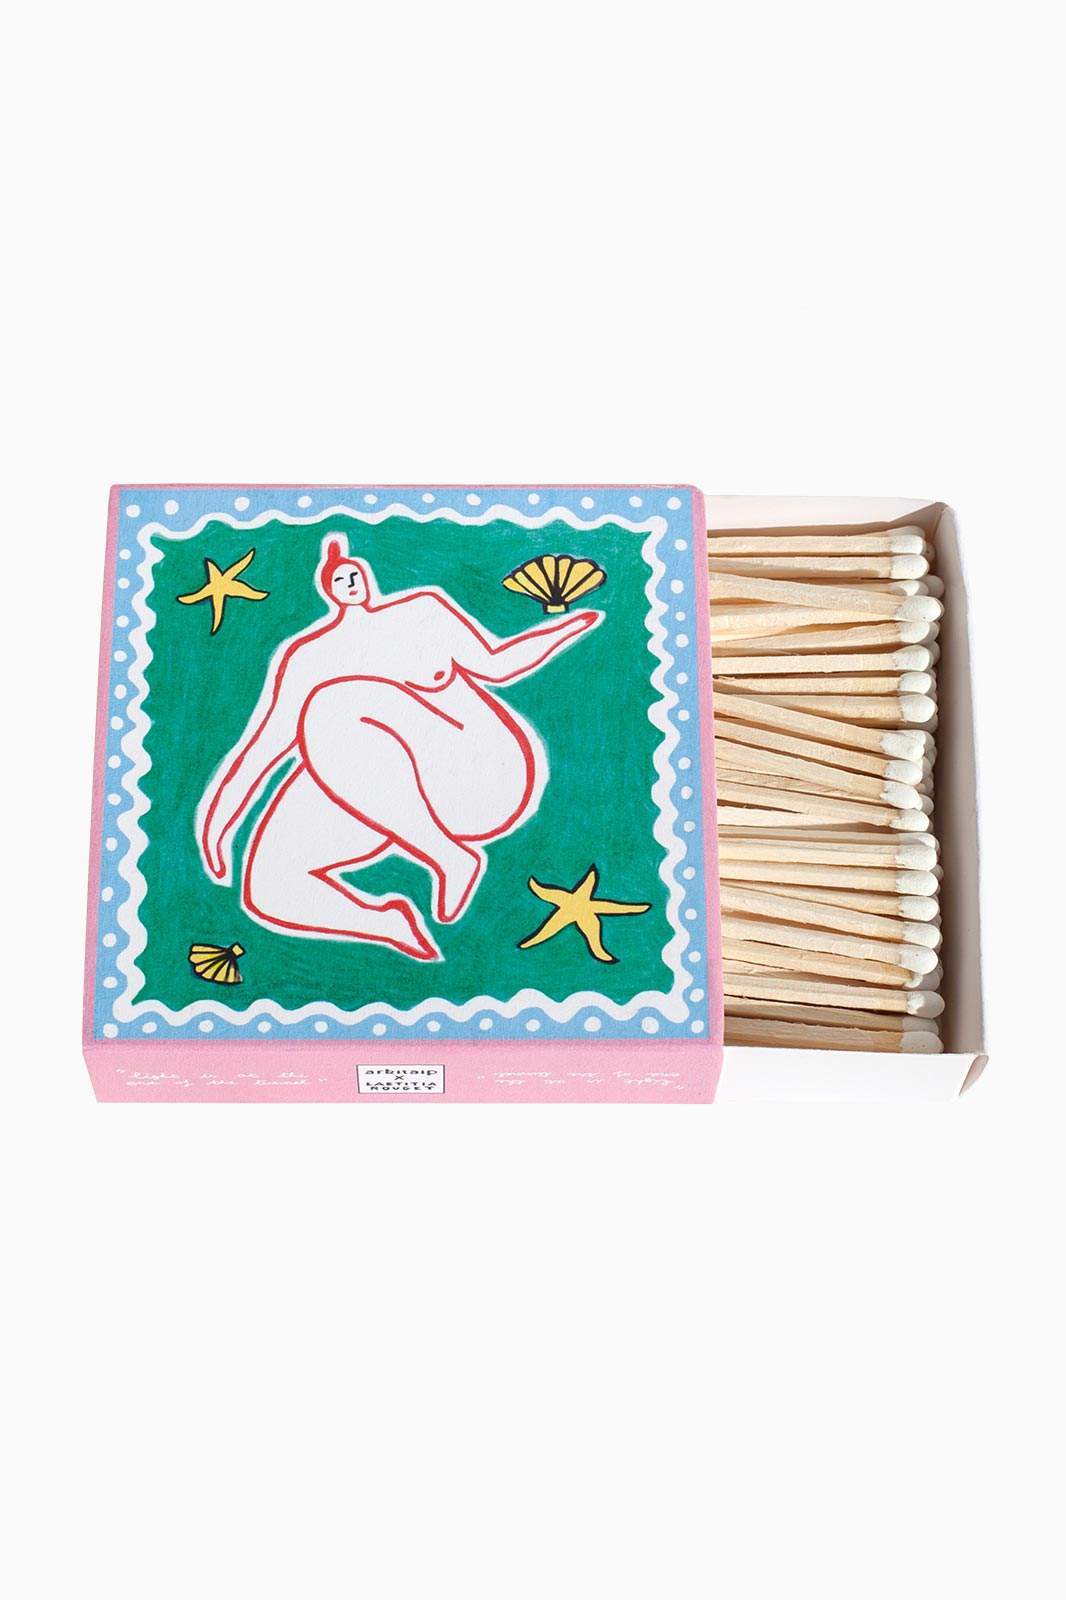 arkitaip Homeware Green/Red arkitaip x Laetitia Rouget Set of Matches